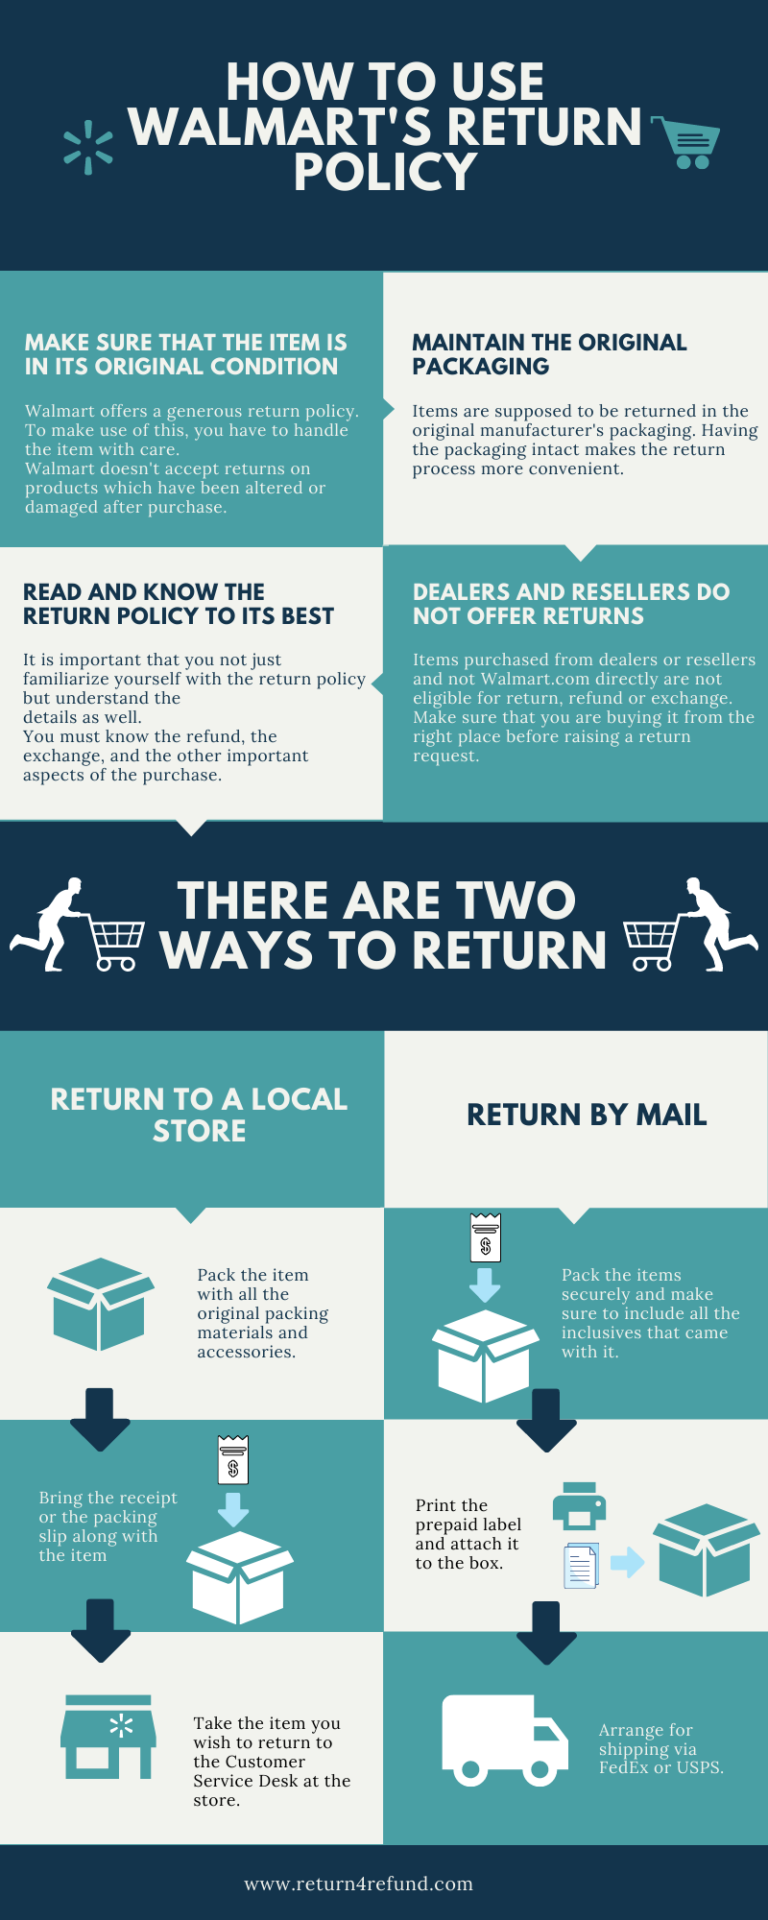 Walmart Return Policy 2020 | Must Read Before You Buy